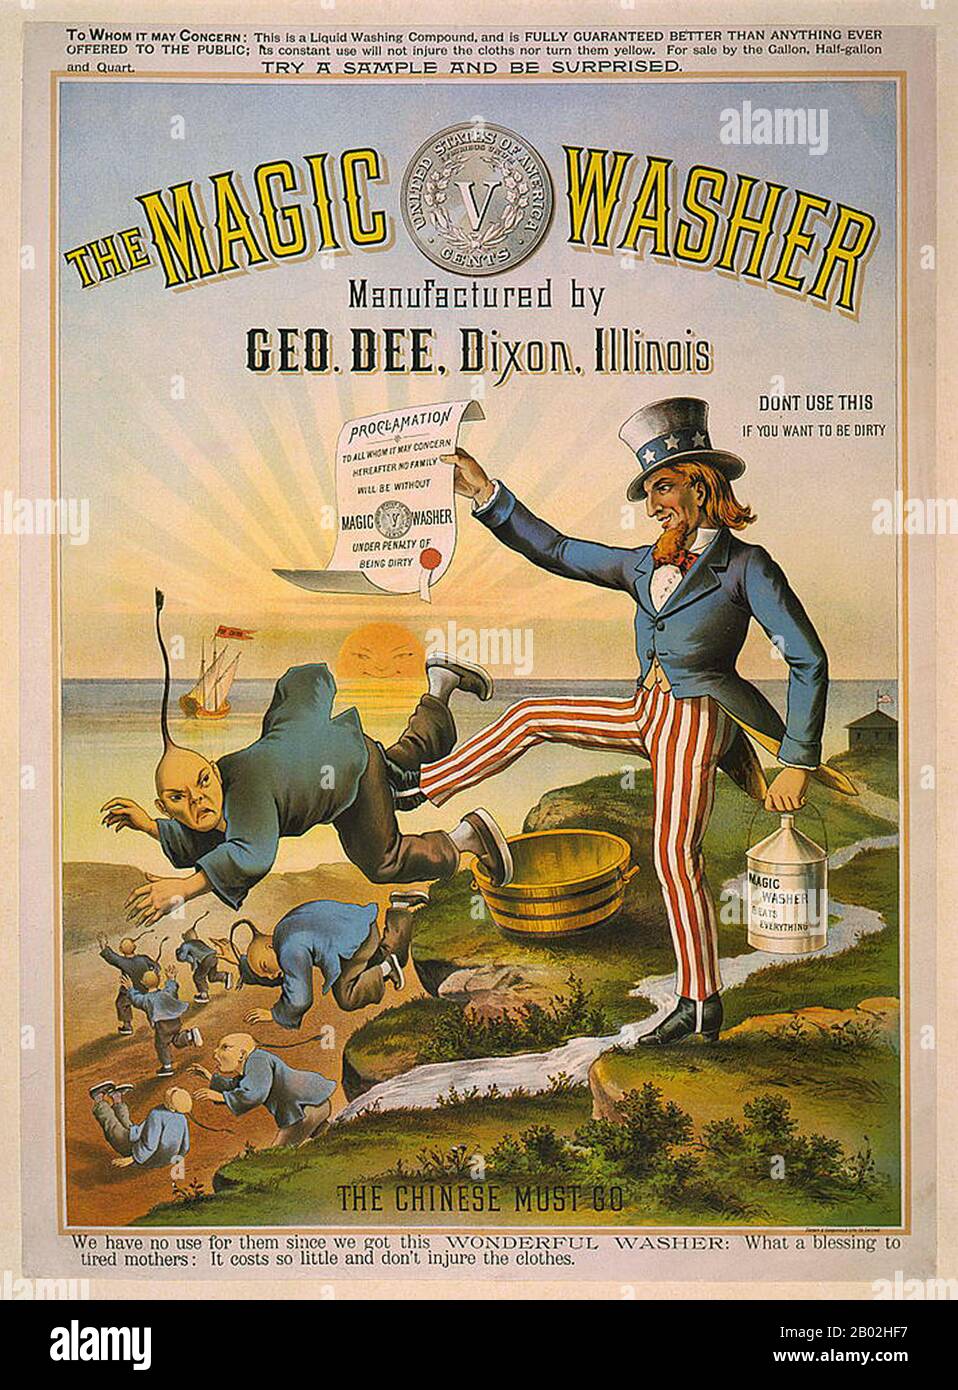 Starting with the California Gold Rush in the late 19th century, the United States—particularly the West Coast states—imported large numbers of Chinese migrant laborers. Early Chinese immigrants worked as gold miners, and later on large labor projects, such as the building of the First Transcontinental Railroad.  Chinese migrant workers encountered considerable prejudice in the United States, especially by the people who occupied the lower layers in white society, because Chinese 'coolies' were used as a scapegoat for depressed wage levels by politicians and labor leaders.  In the 1870s and 18 Stock Photo